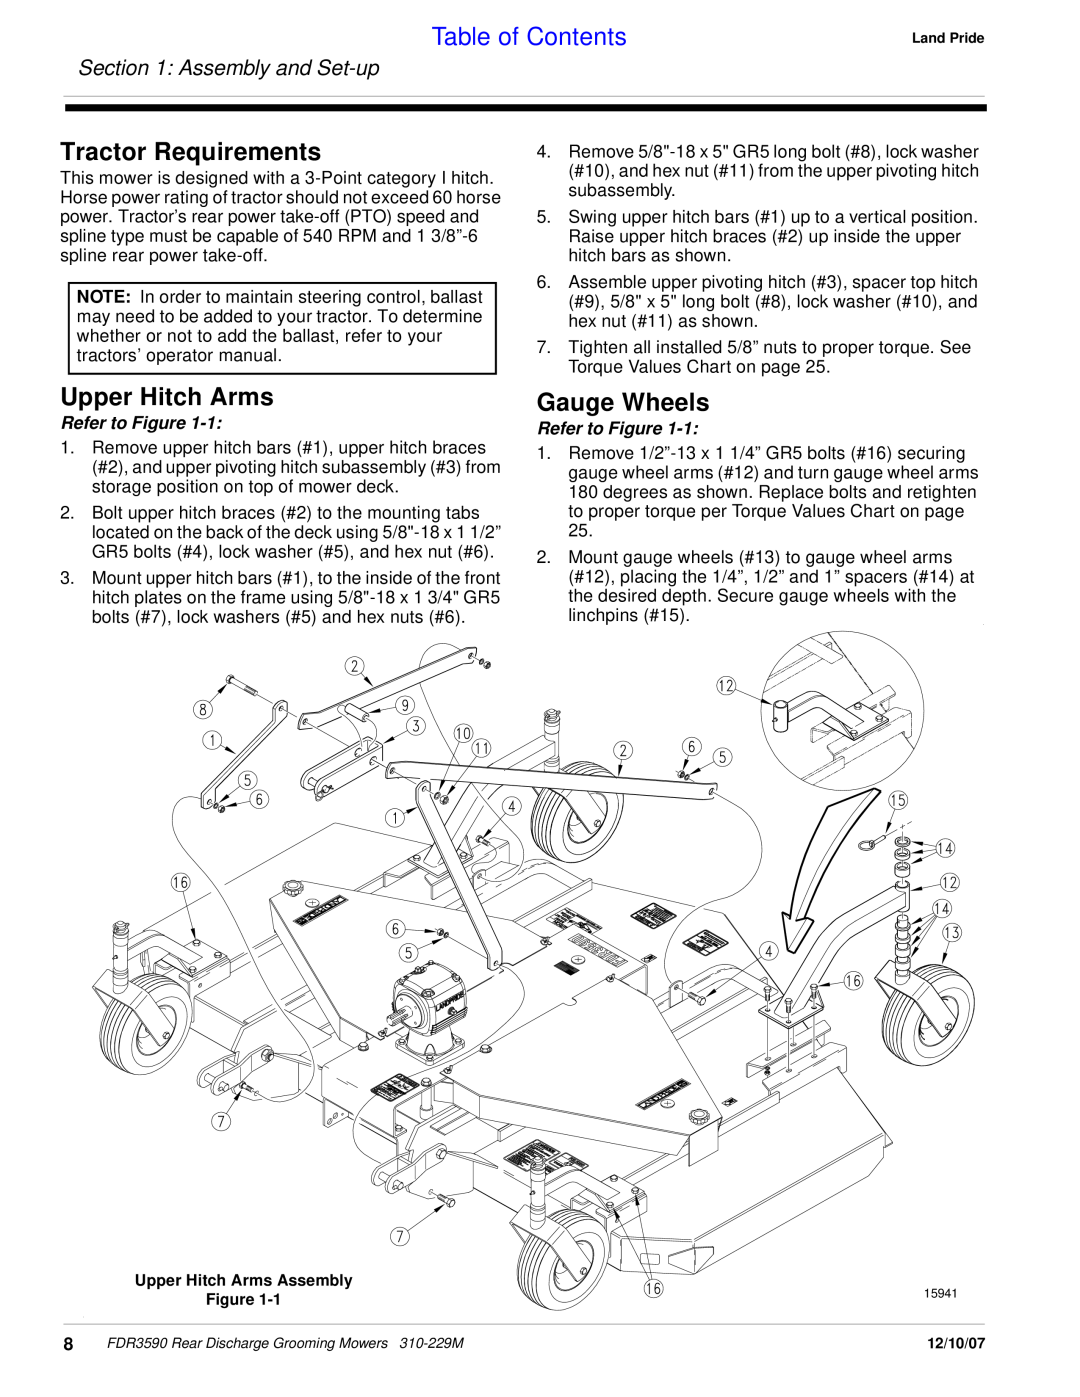 Land Pride FDR3590 manual Tractor Requirements, Upper Hitch Arms, Gauge Wheels, Assembly and Set-up, Refer to Figure 